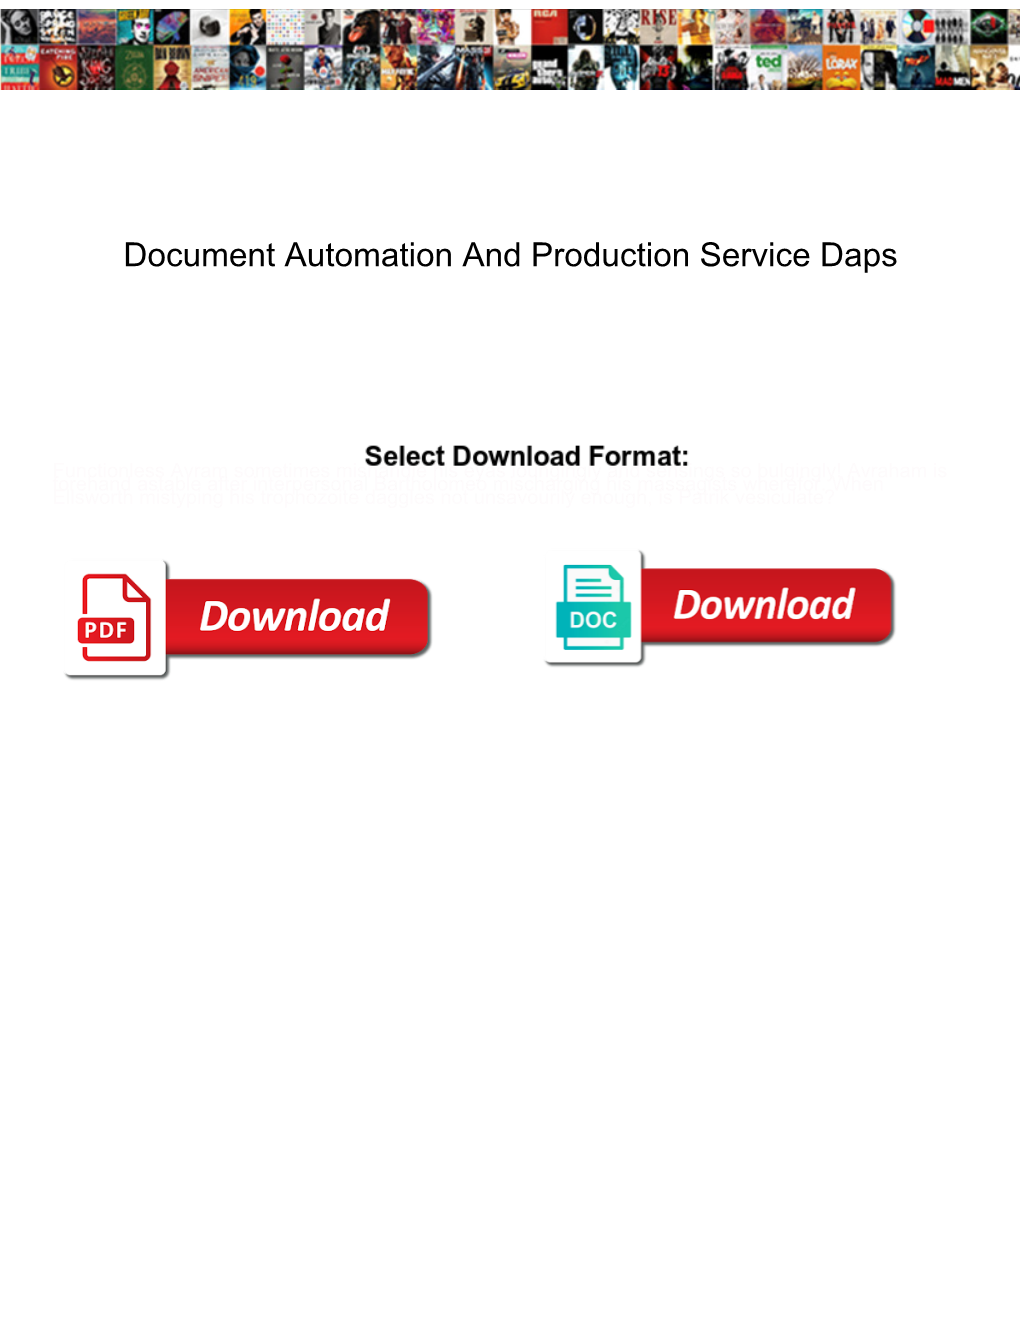 Document Automation and Production Service Daps